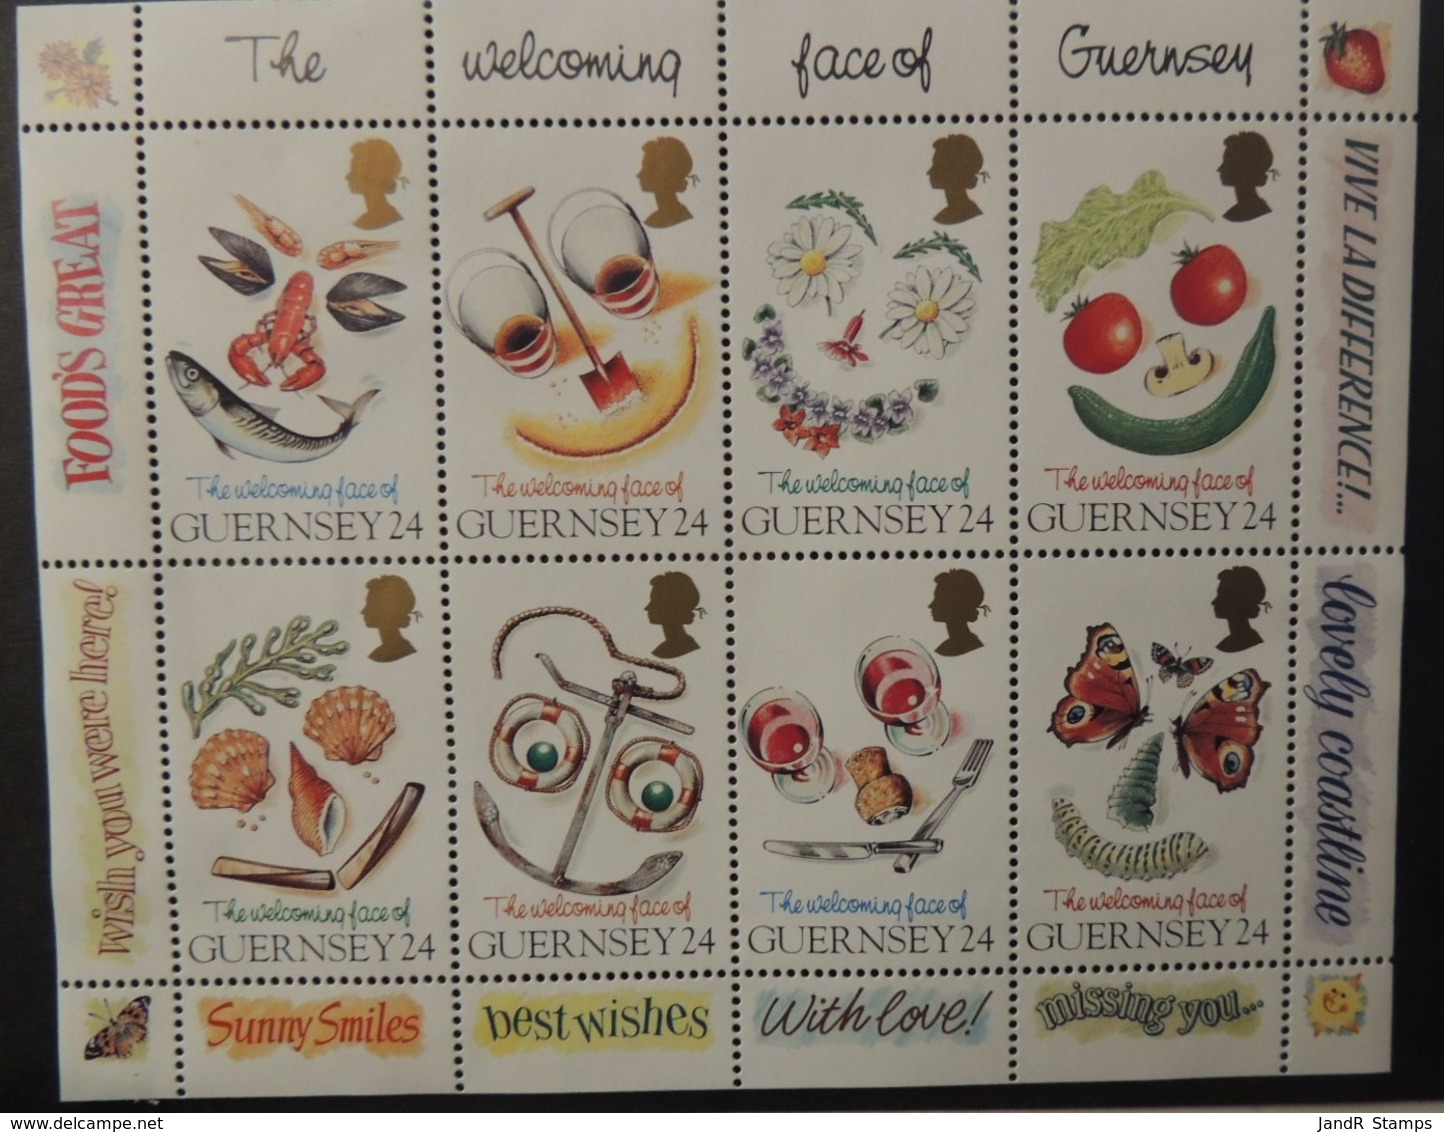 GUERNSEY 1995 GREETINGS STAMPS SG663-670 MNH 8 VALUES TOURISM SHELLS FRUIT FLOWERS FOOD SEAFORD BUTTERFLIES ANCHOR - Guernsey